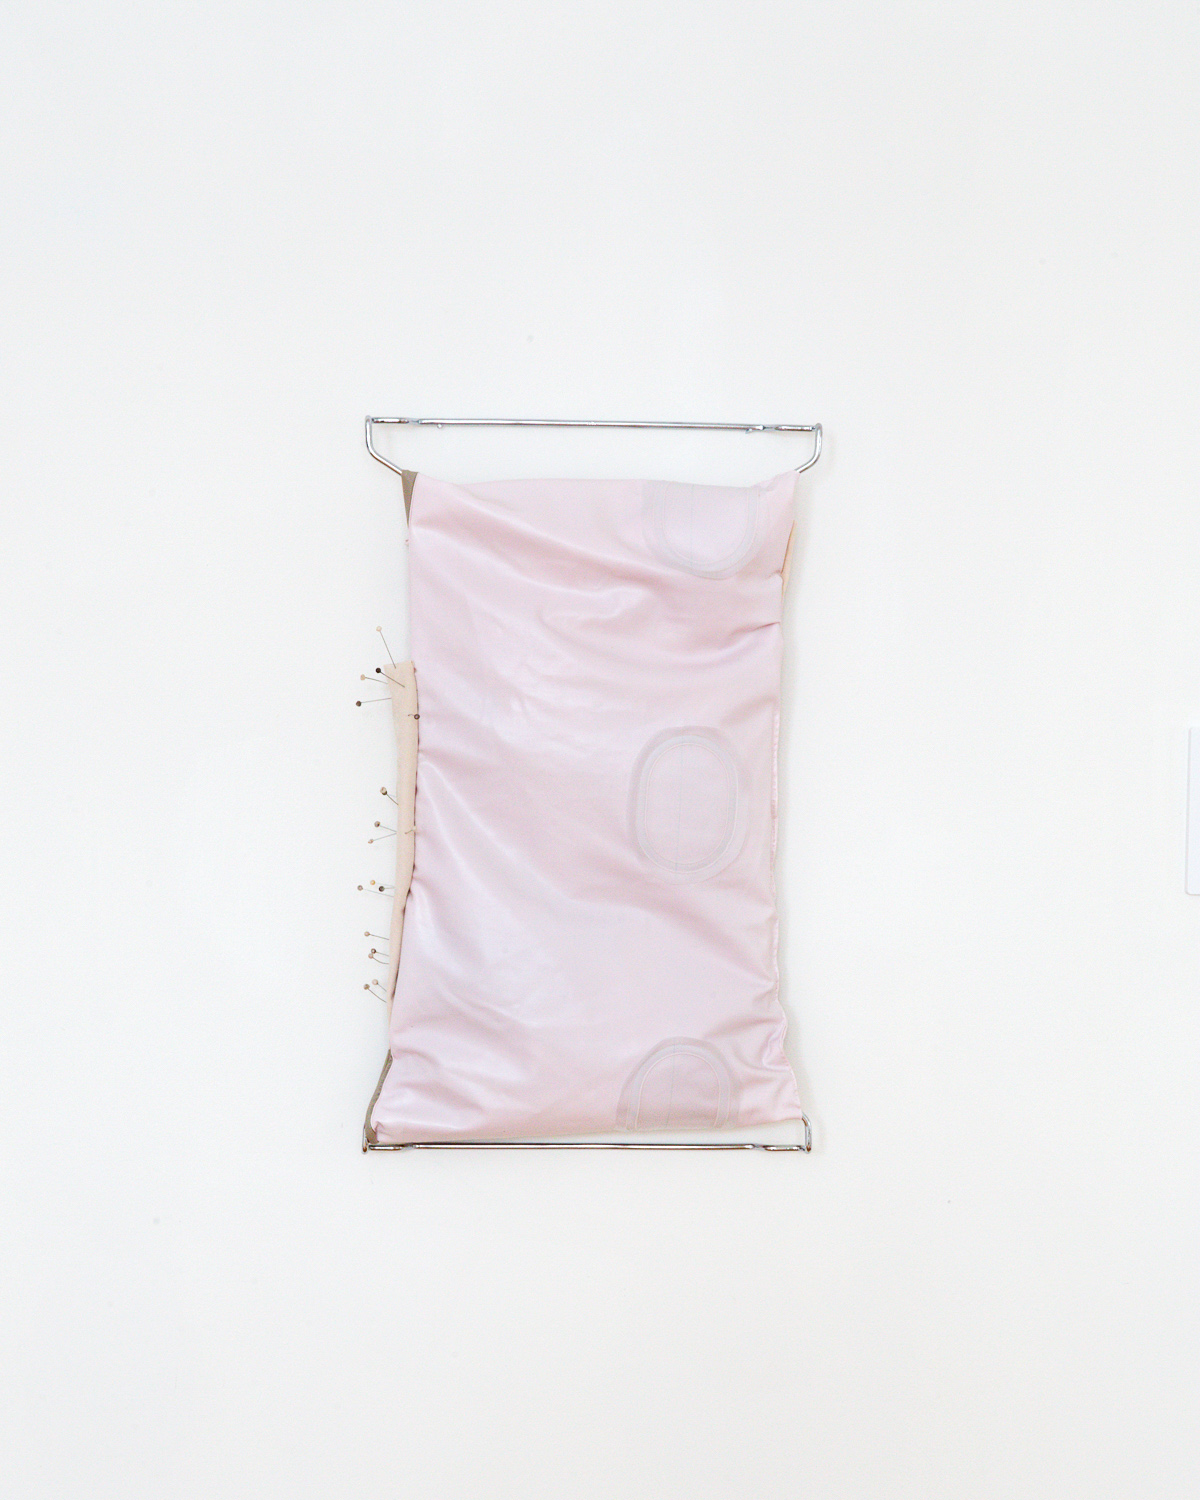 A pink air mattress sewn onto a metal rectangular structure. The left side of the work has a beige patch of fabric with numerous ball point sewing pins protruding from it. This piece is displayed on the wall.